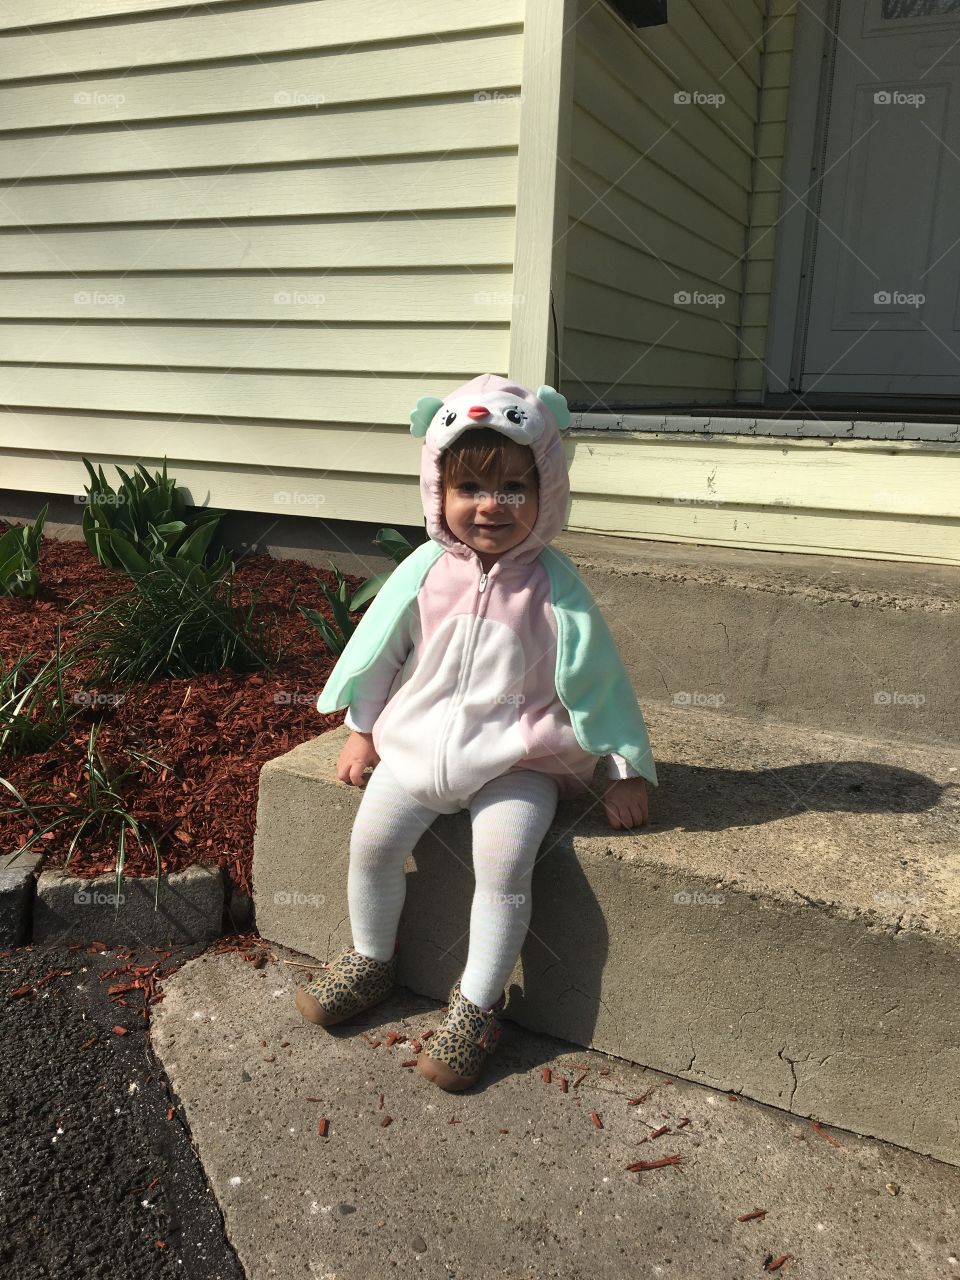 Easter 2016 outfit for my 18 month old. Just too precious 